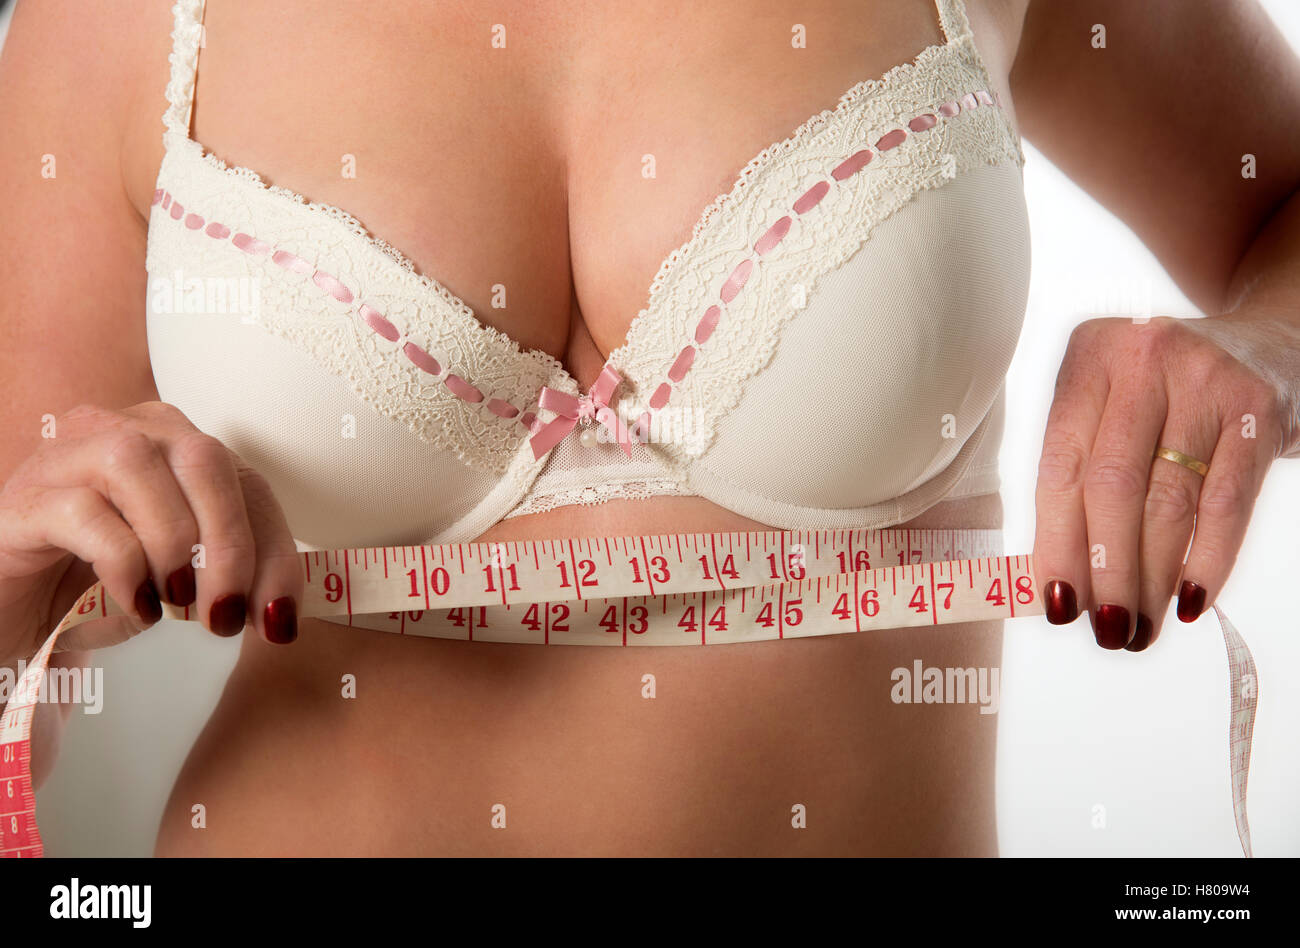 Woman measuring her breast size Stock Photo by ©wacpan 3994258